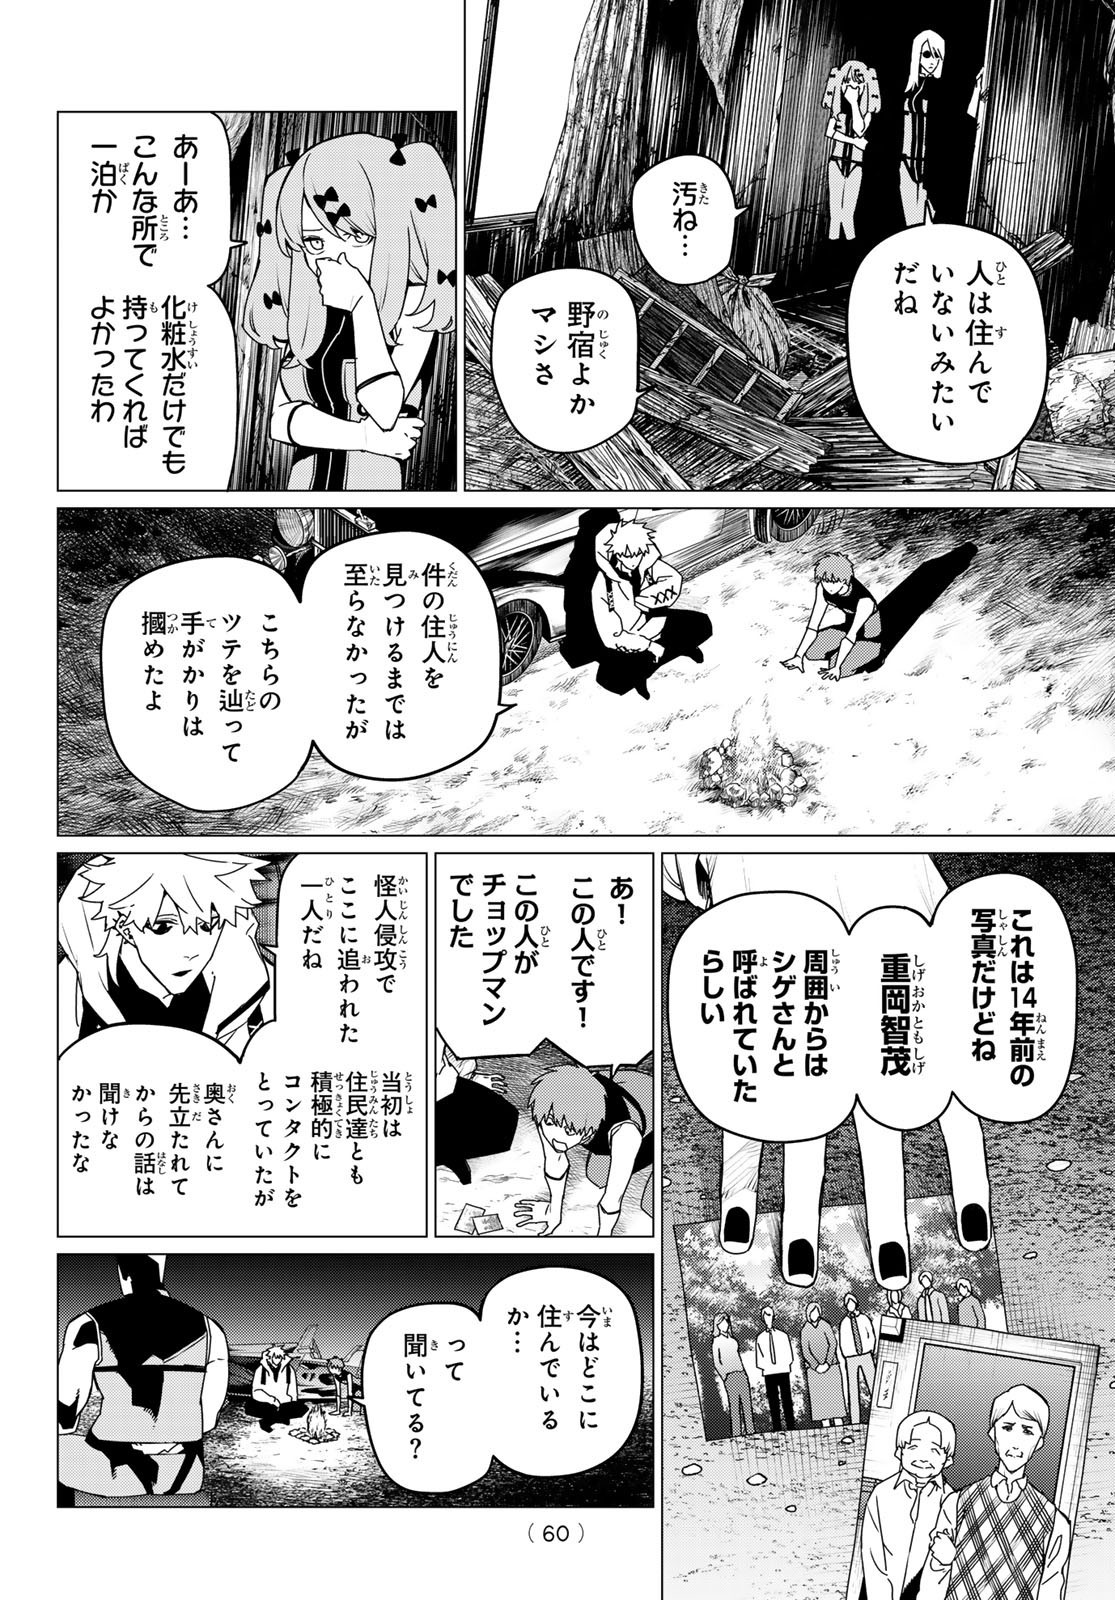 Weekly Shōnen Magazine - 週刊少年マガジン - Chapter 2024-23 - Page 58